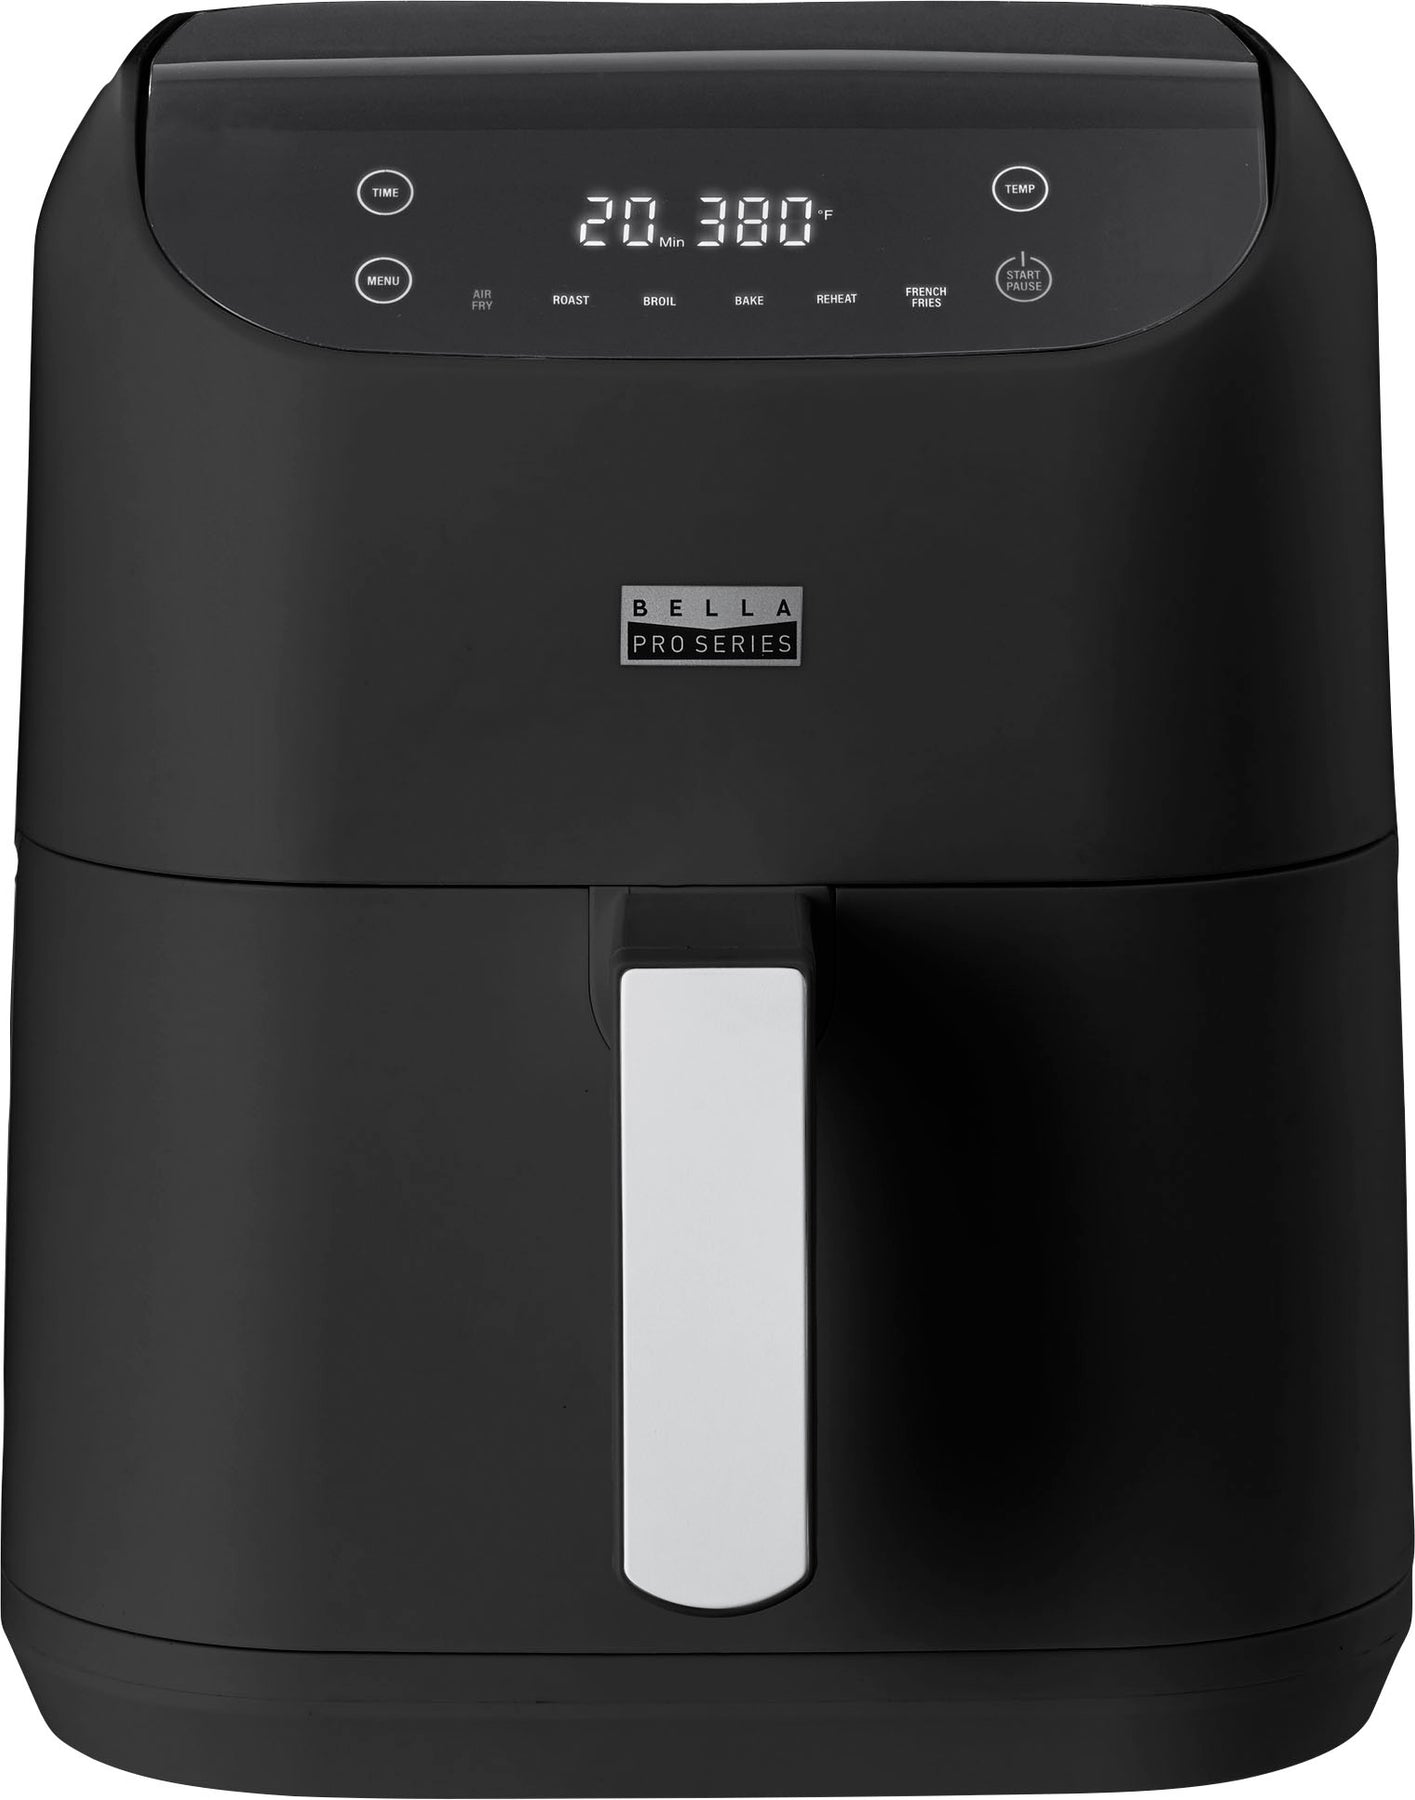 A Beautiful 6 quart touchscreen air fryer with a white finish.